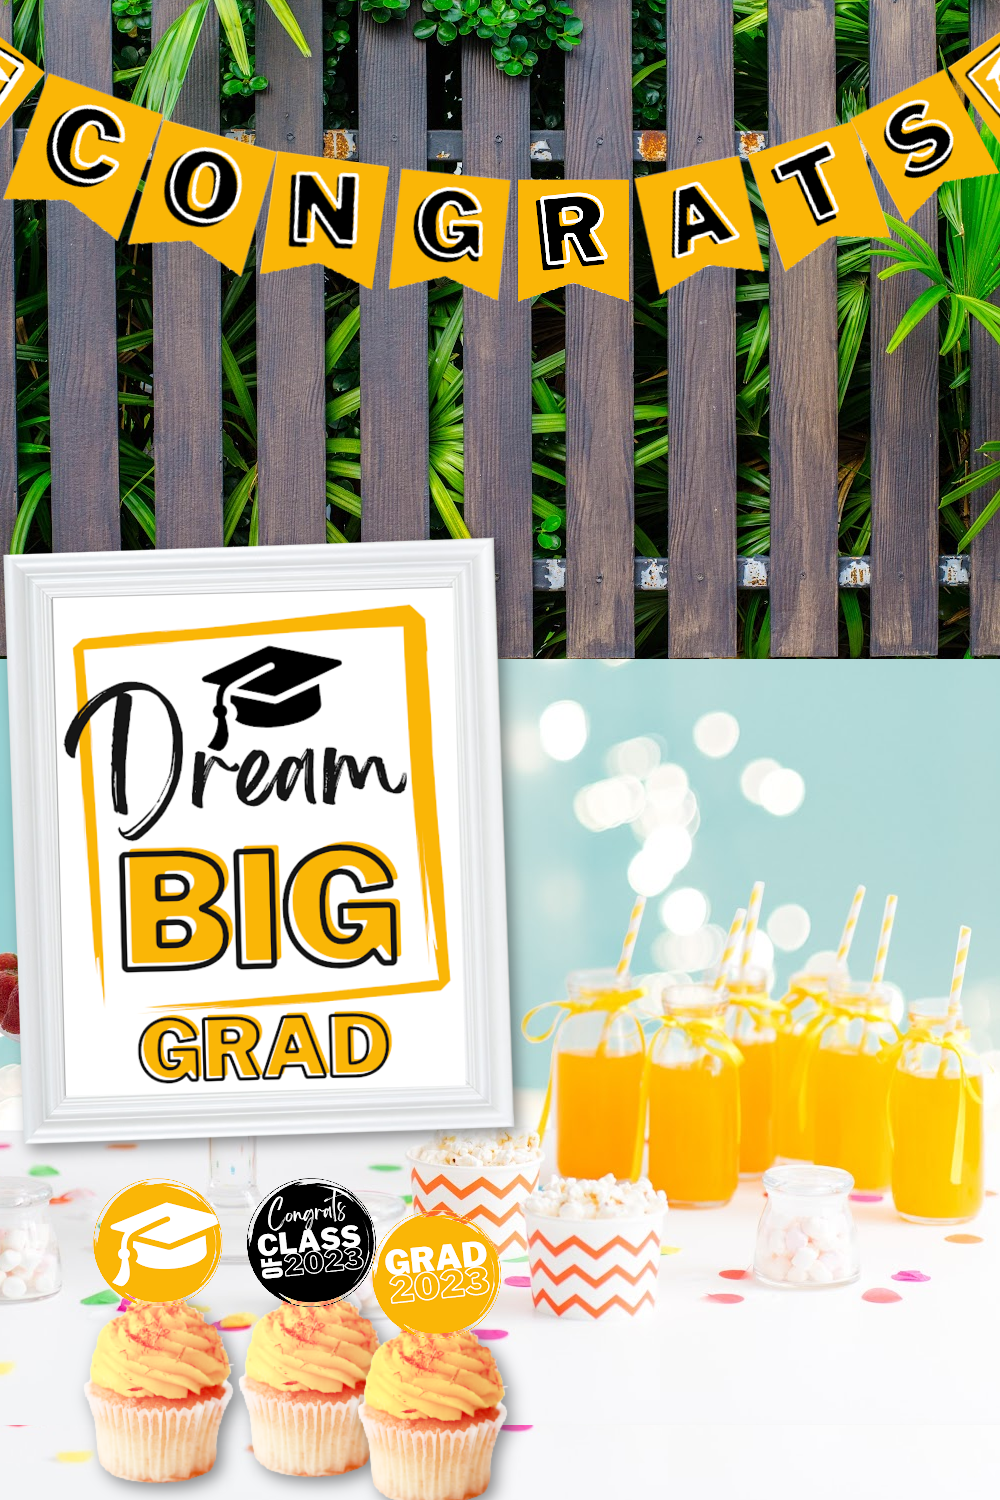 Top of the image is a brown wood fence with a yellow "congrats" sign hanging on it. Graduation party table with a printable "dream big grad" sign, printable cupcake toppers on cupcakes and orange drinks with straws.